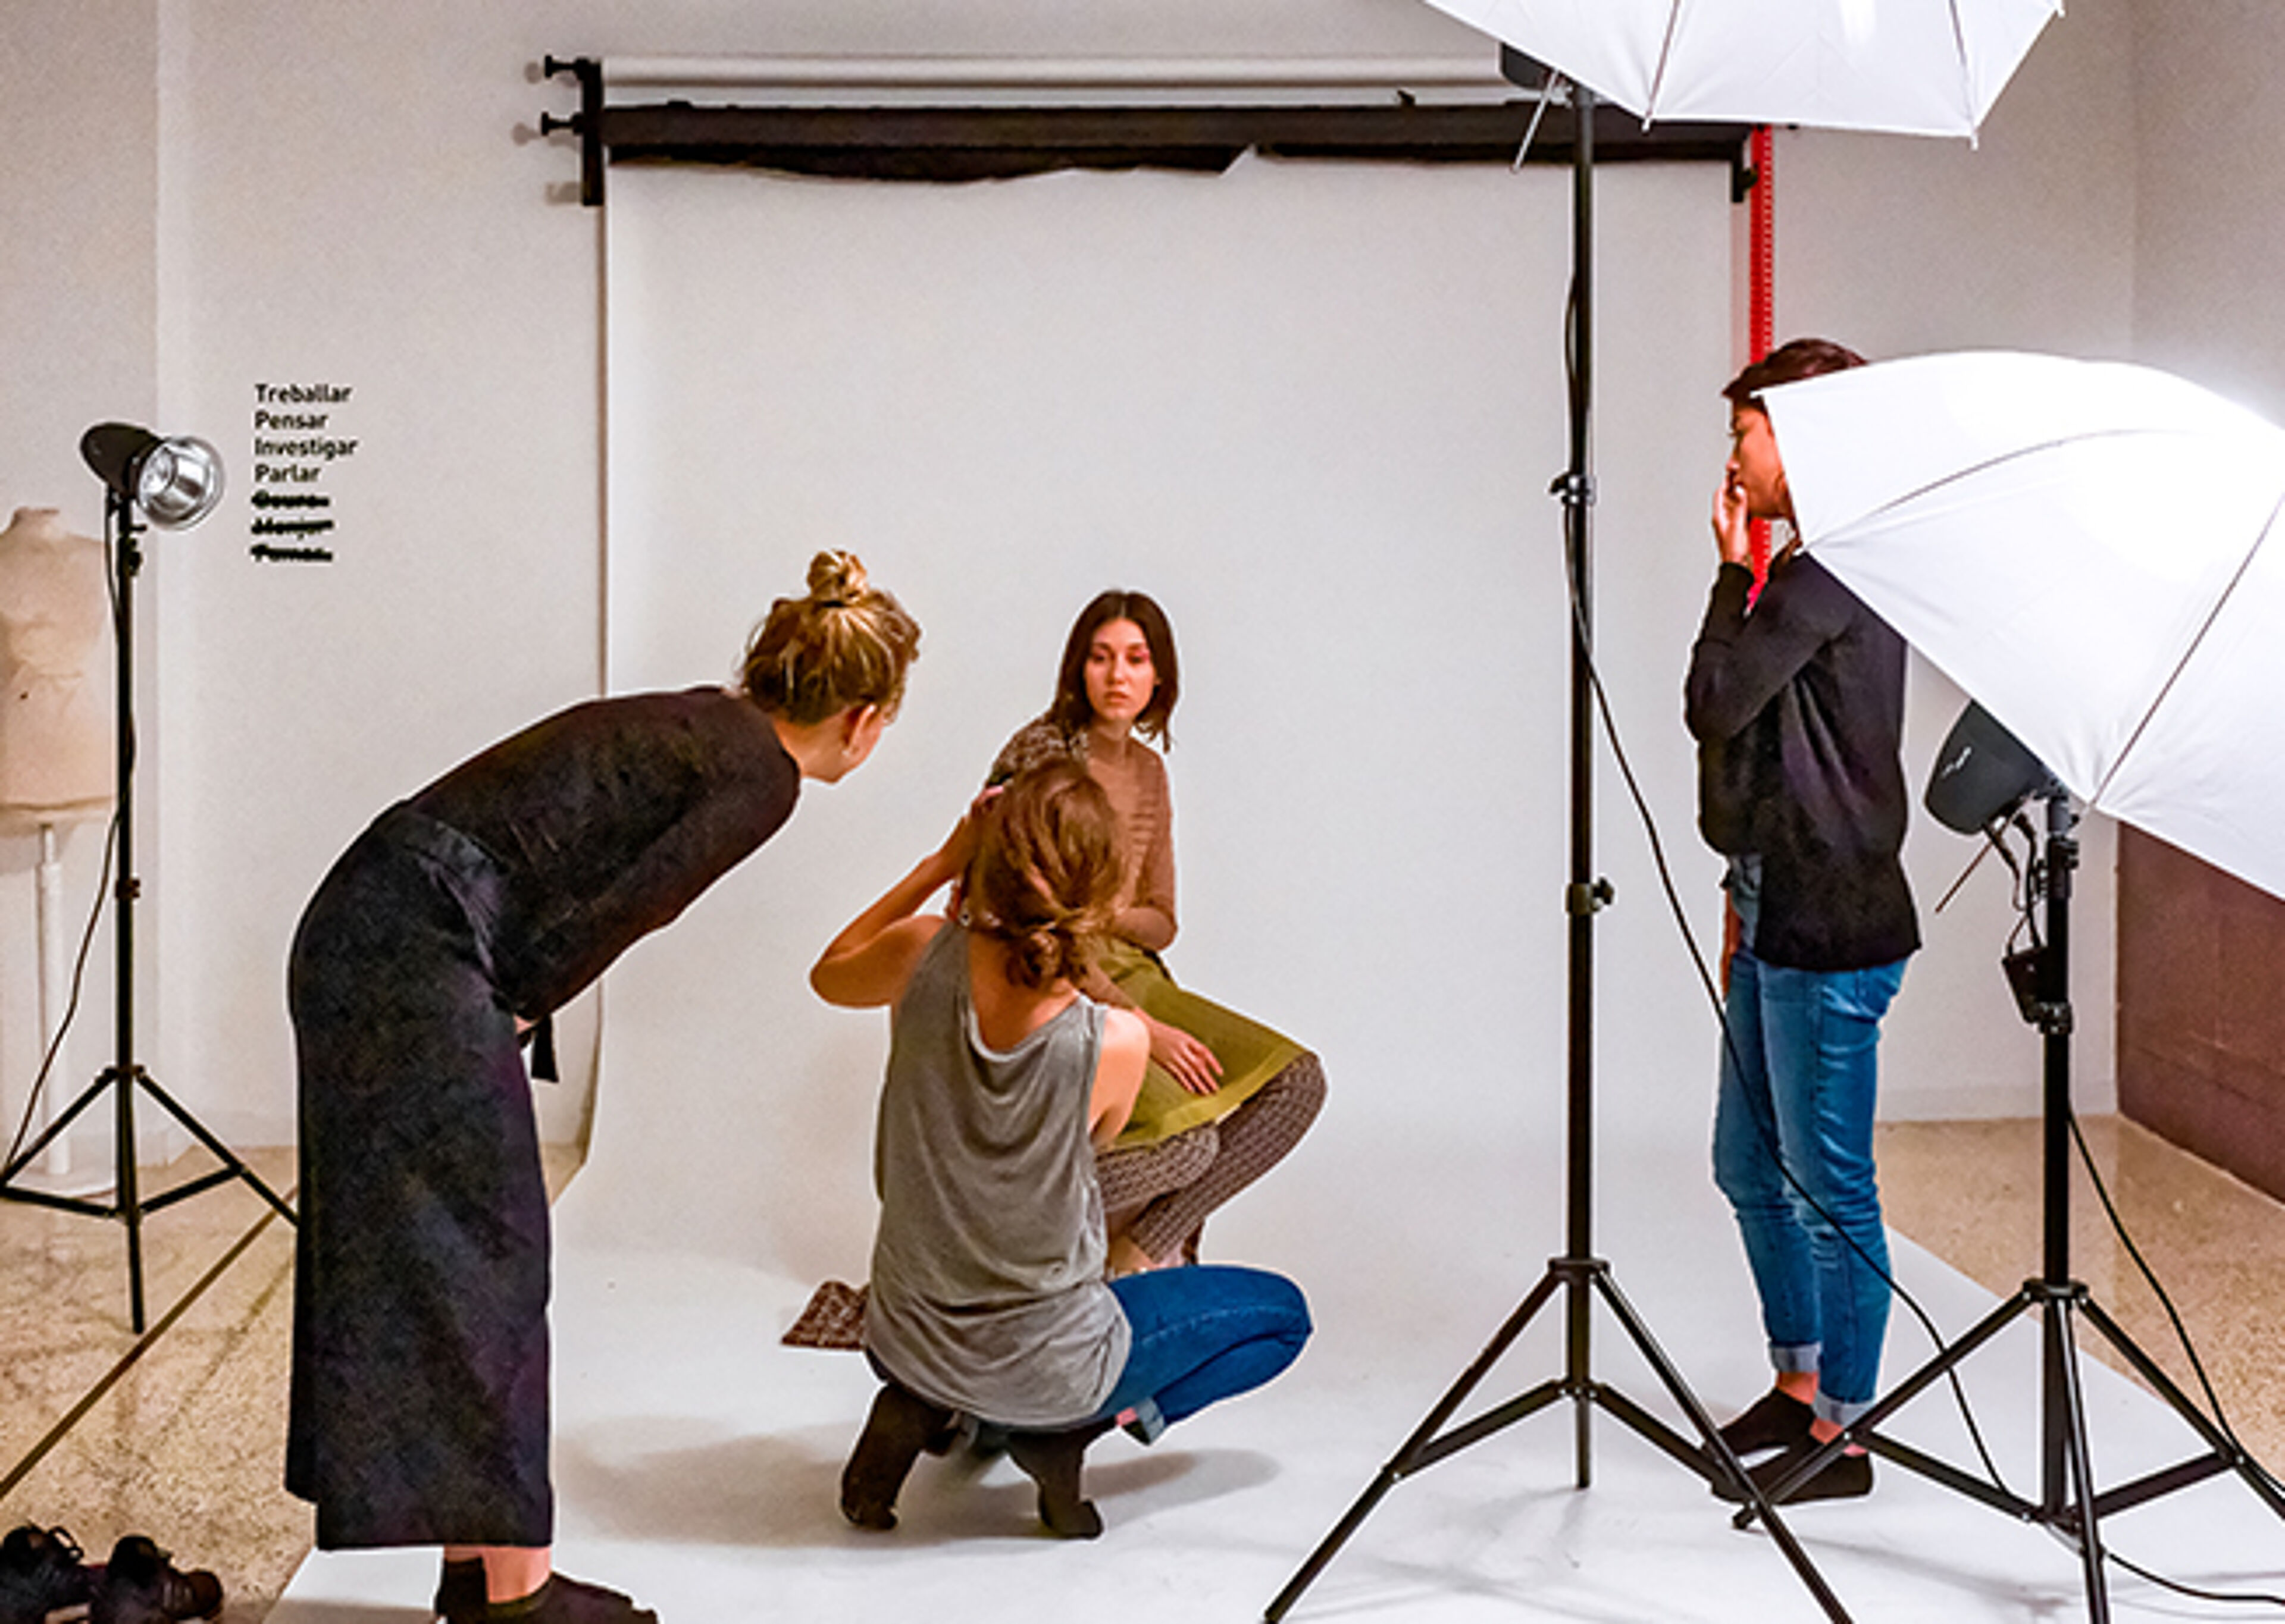 Behind-the-scenes view of a photo shoot with a photographer, model, and stylist working under studio lighting.